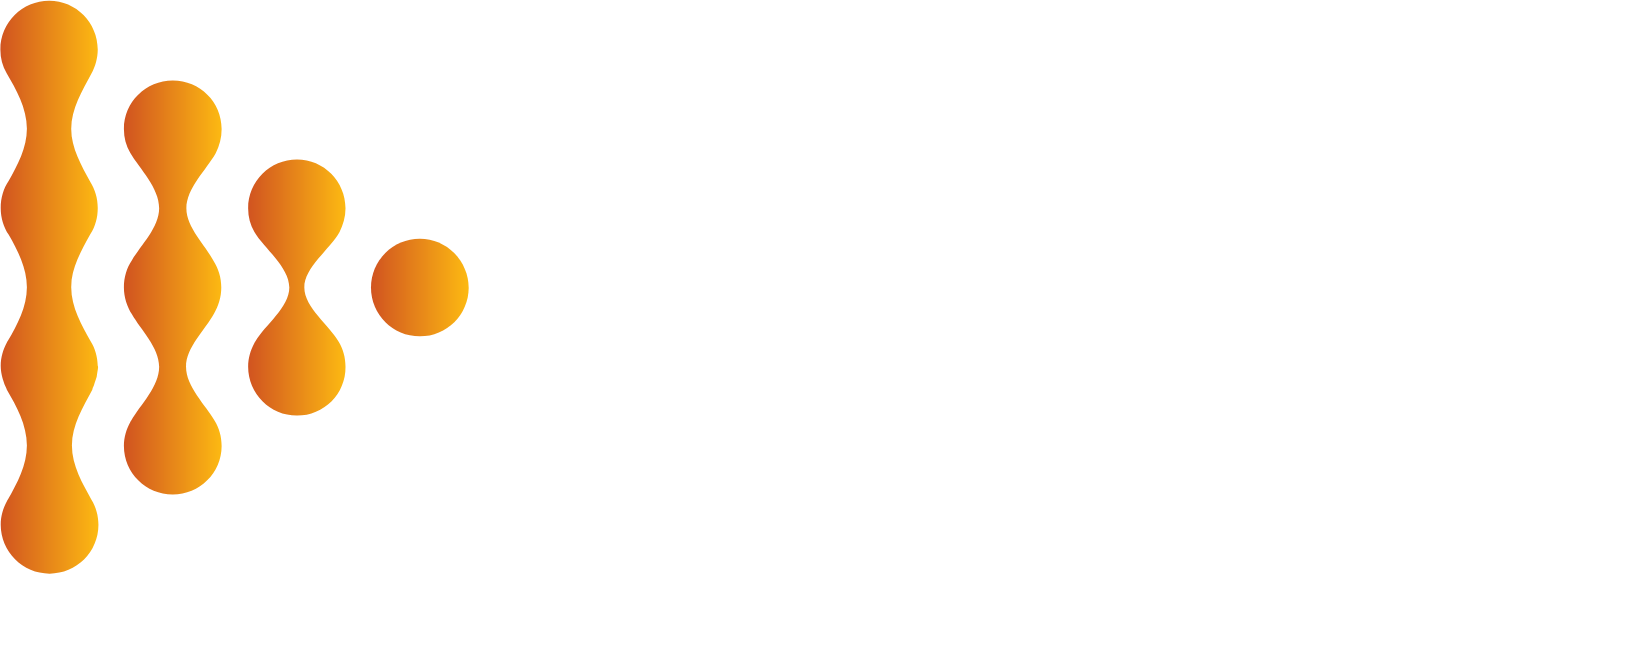 Ichor Systems logo large for dark backgrounds (transparent PNG)